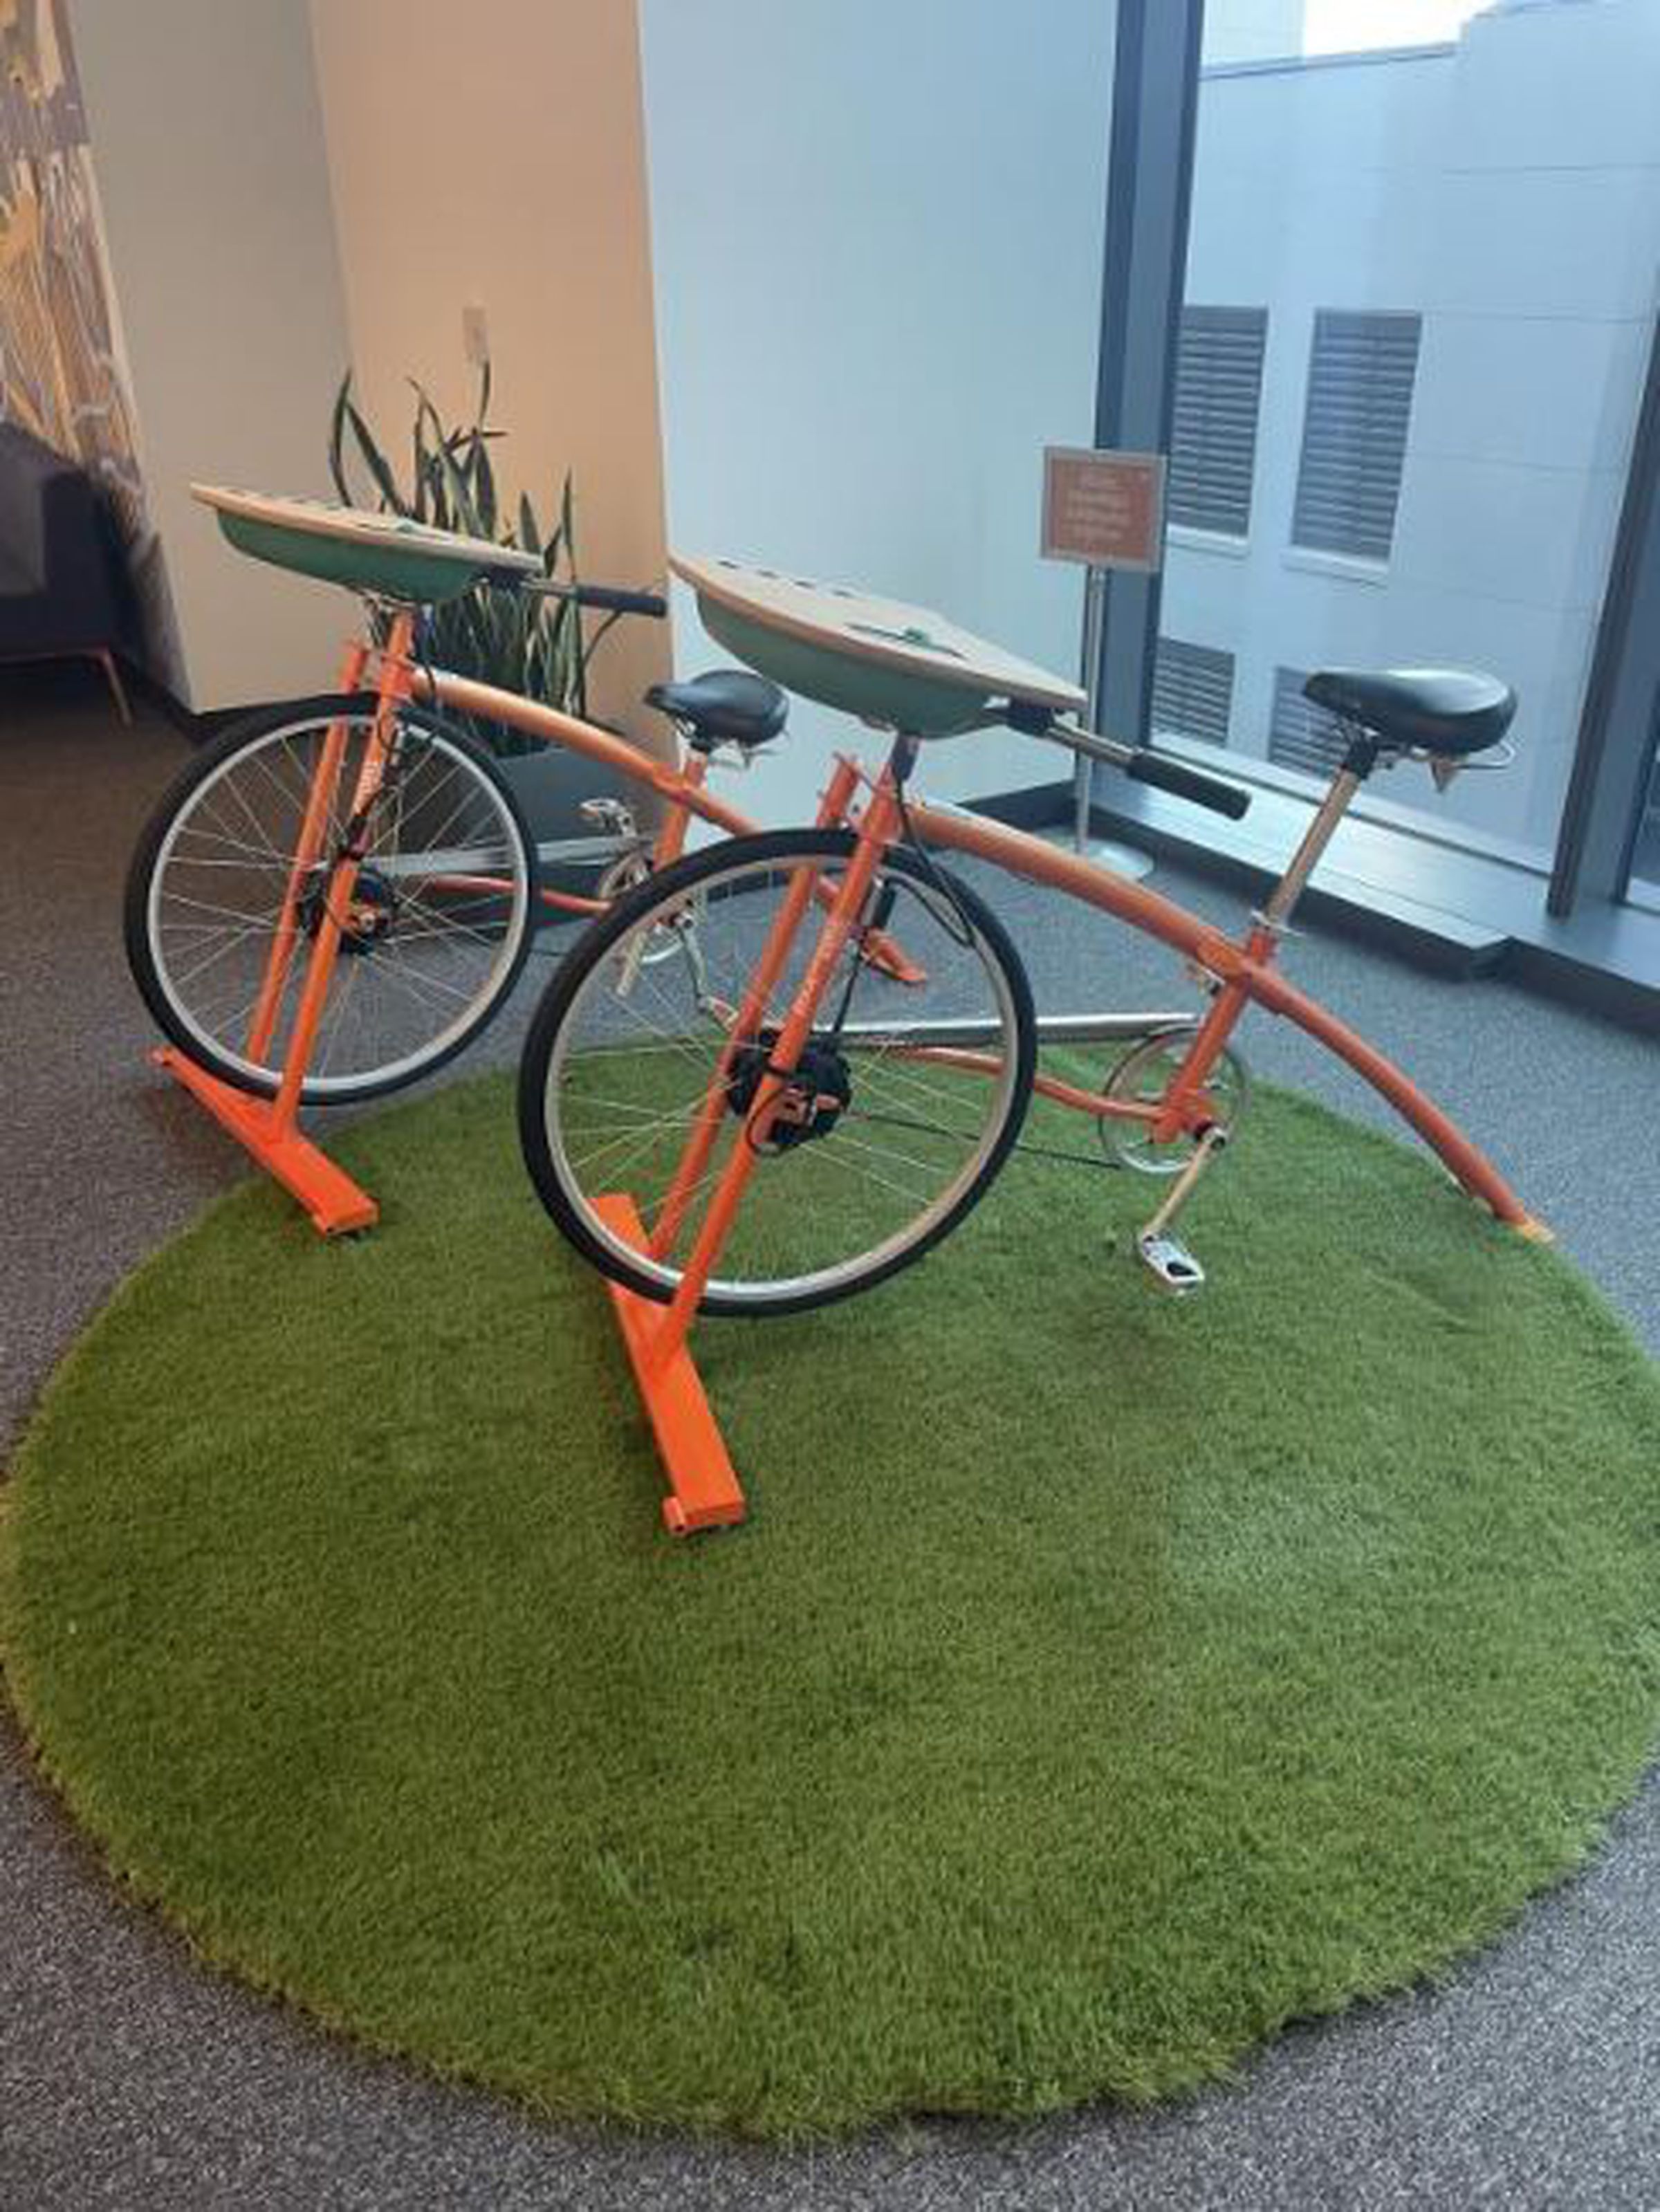 Two Rock the Bike recharging stations on a green rug